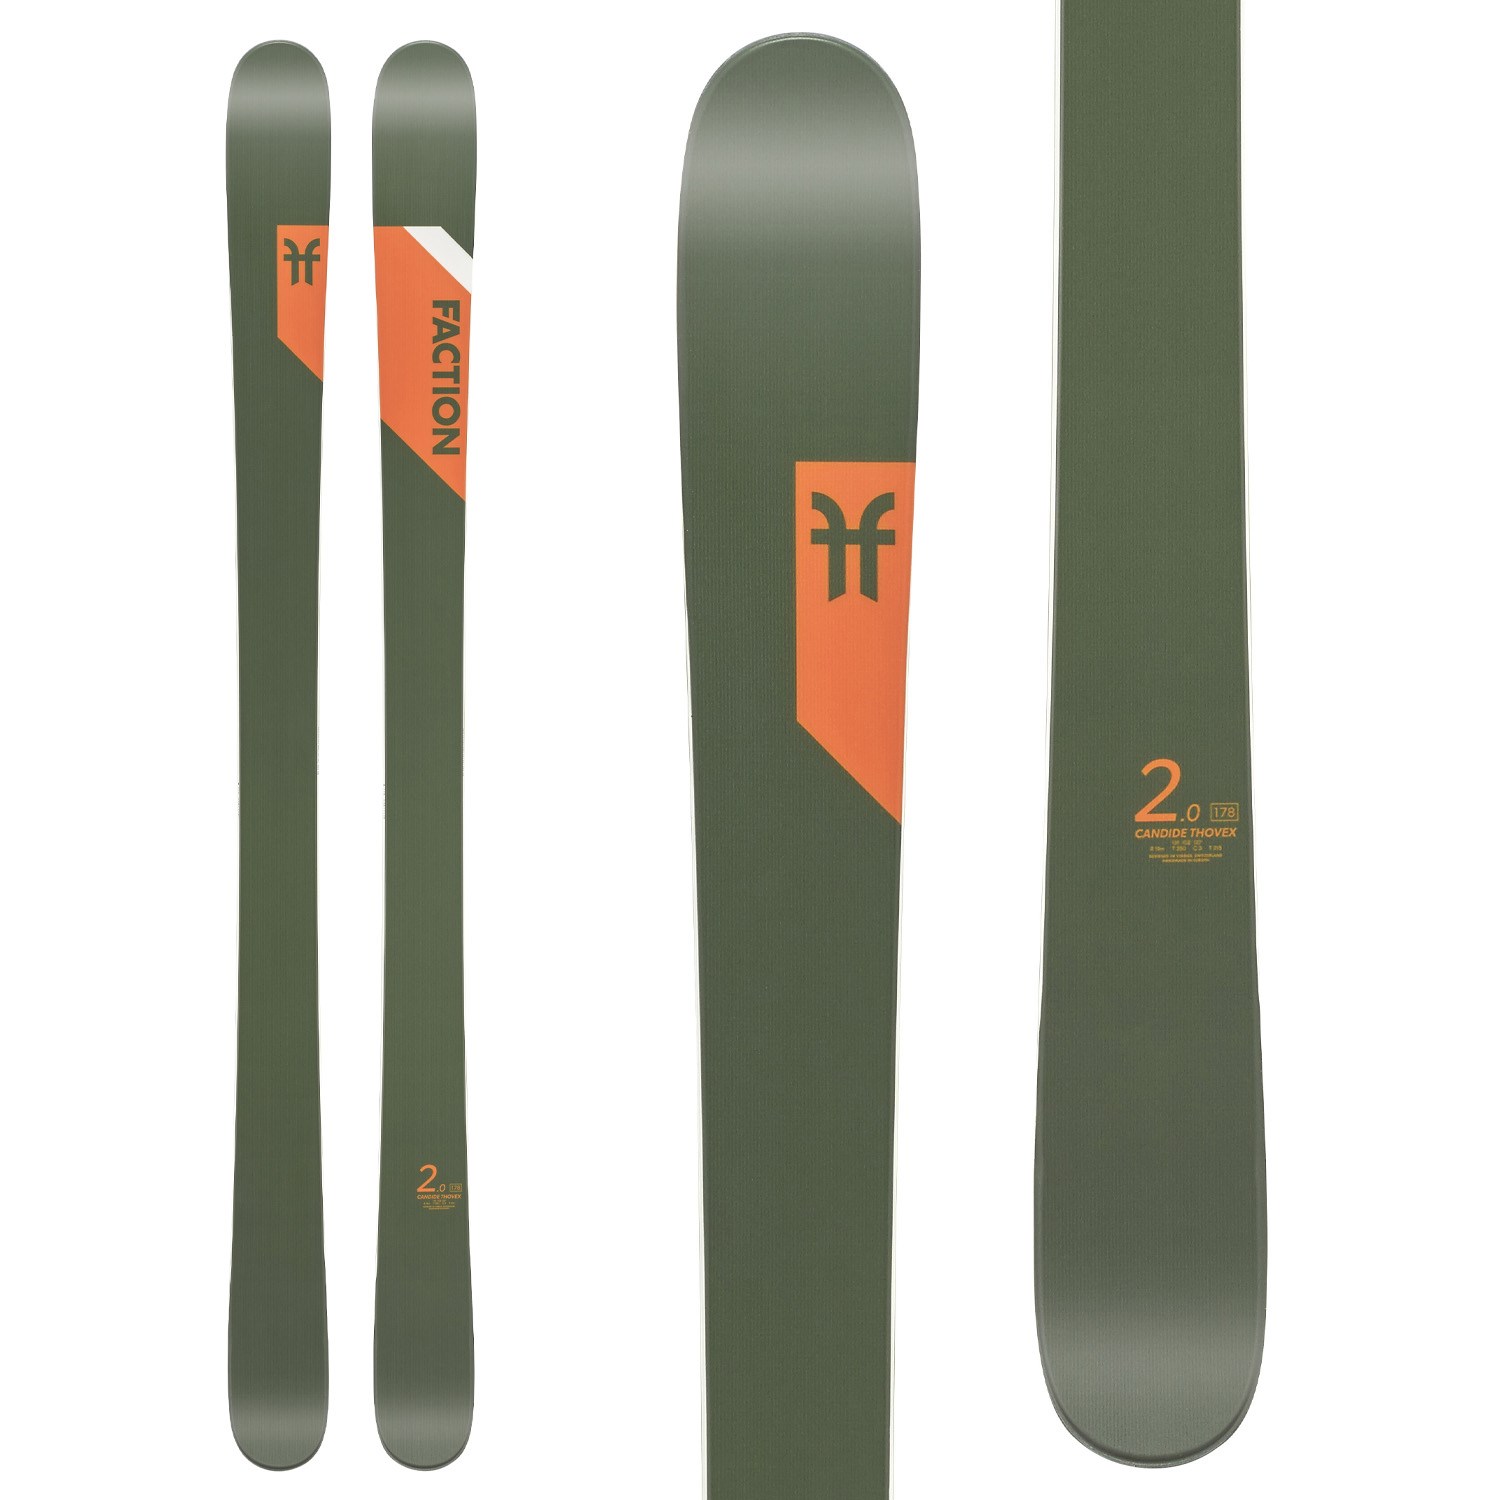 Faction лыжи. Candide Skis. Faction CT 2.0 X. Z Club 22 лыжи. Skis 2022